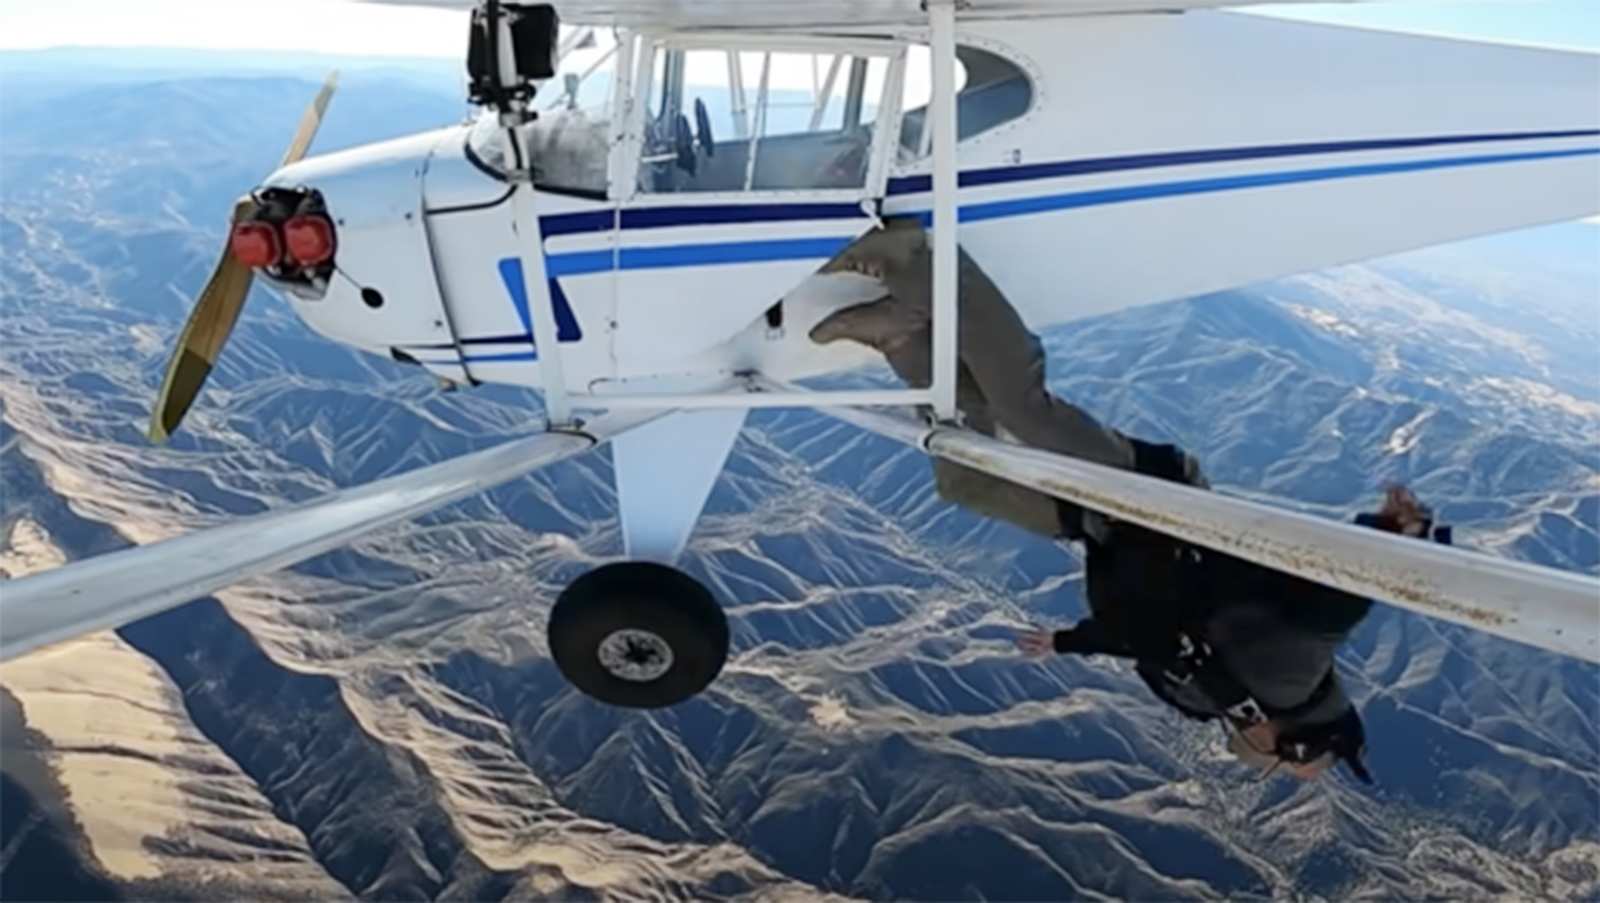 YouTuber Trevor Jacob’s pilot license yanked for faking his own plane crash for video, FAA says